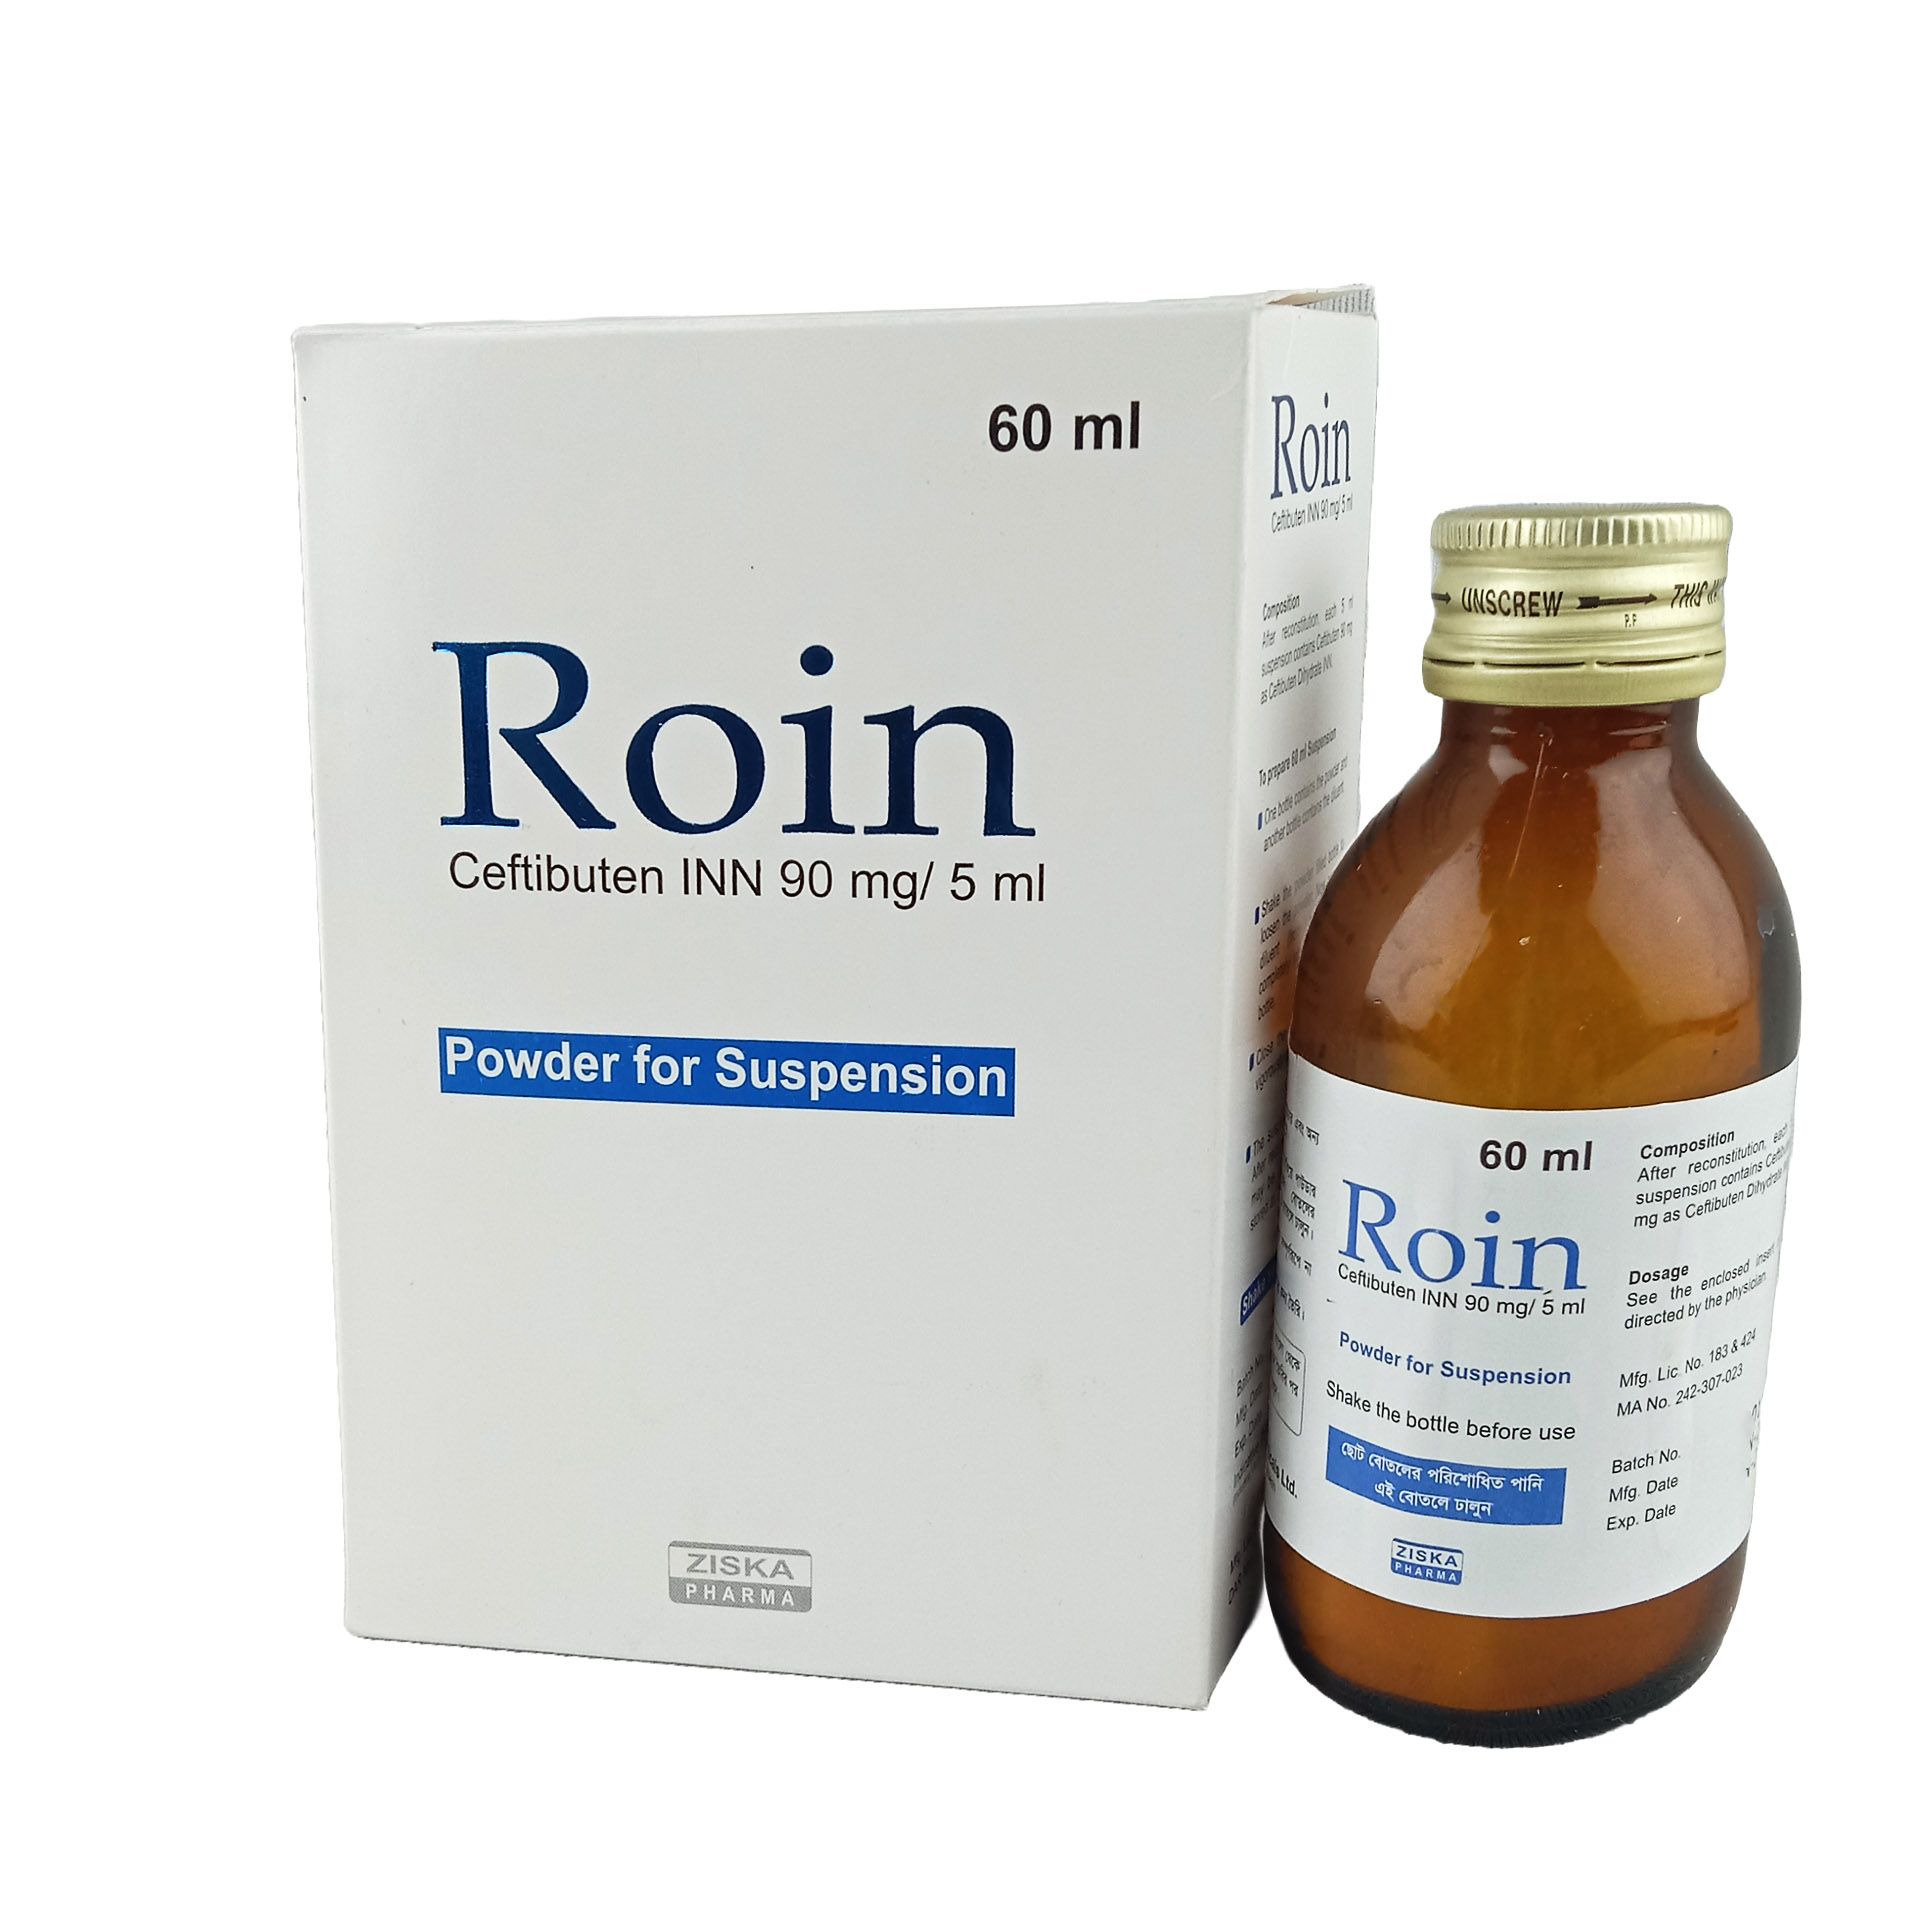 Roin 90mg/5ml Powder for Suspension